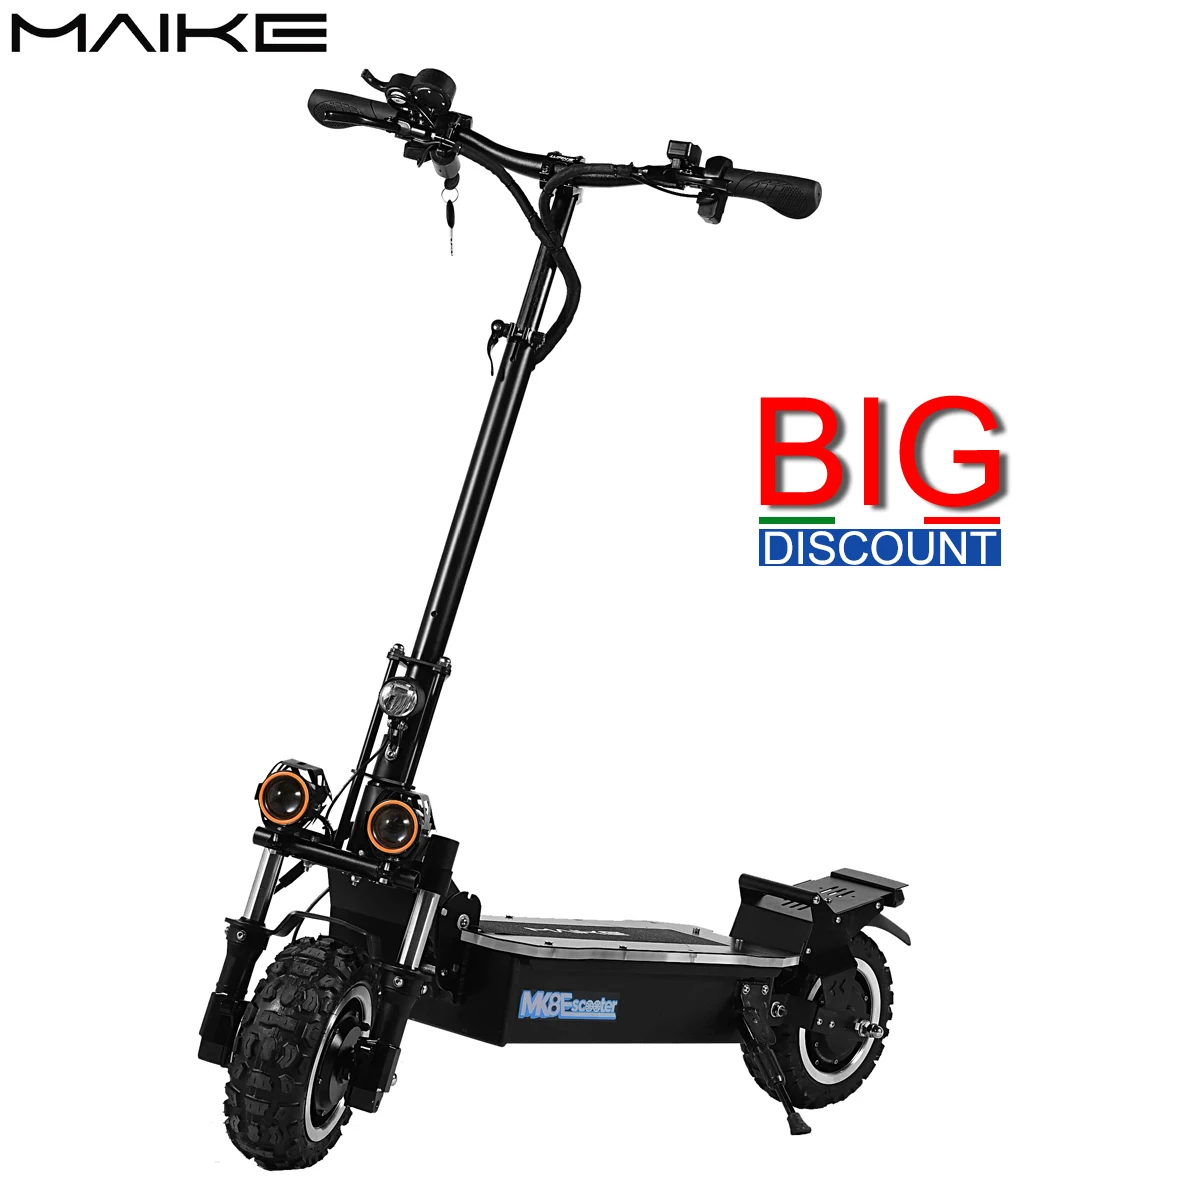 

Wholesale Cheap Price maike mk8 11 inch fat tire 3200w dual motor electric motorcycle mobility scooter for adults